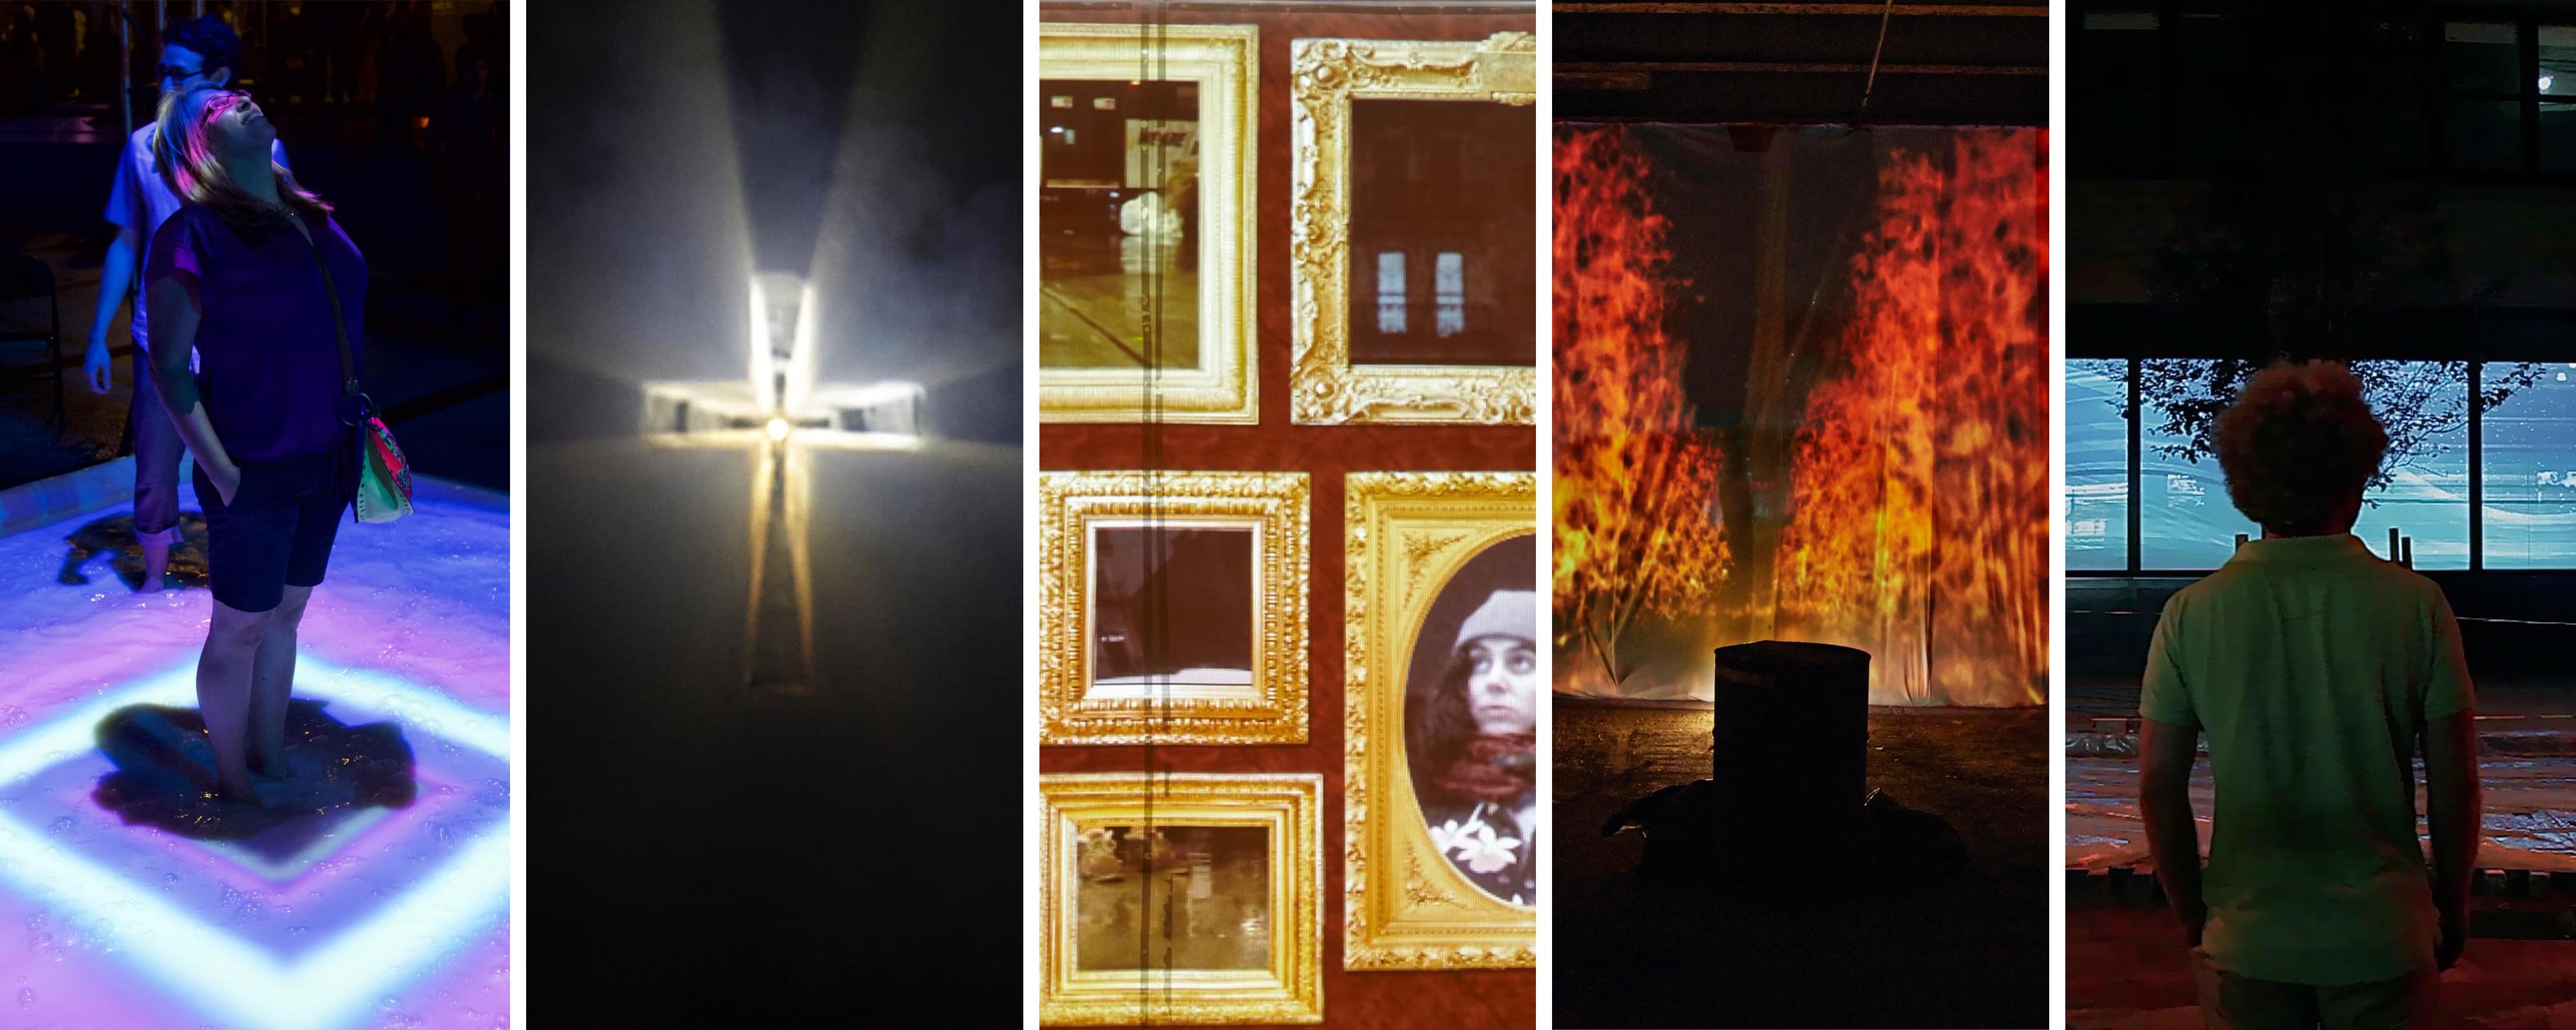 A compilation of 5 photos of different nighttime video installations arranged in vertical strips